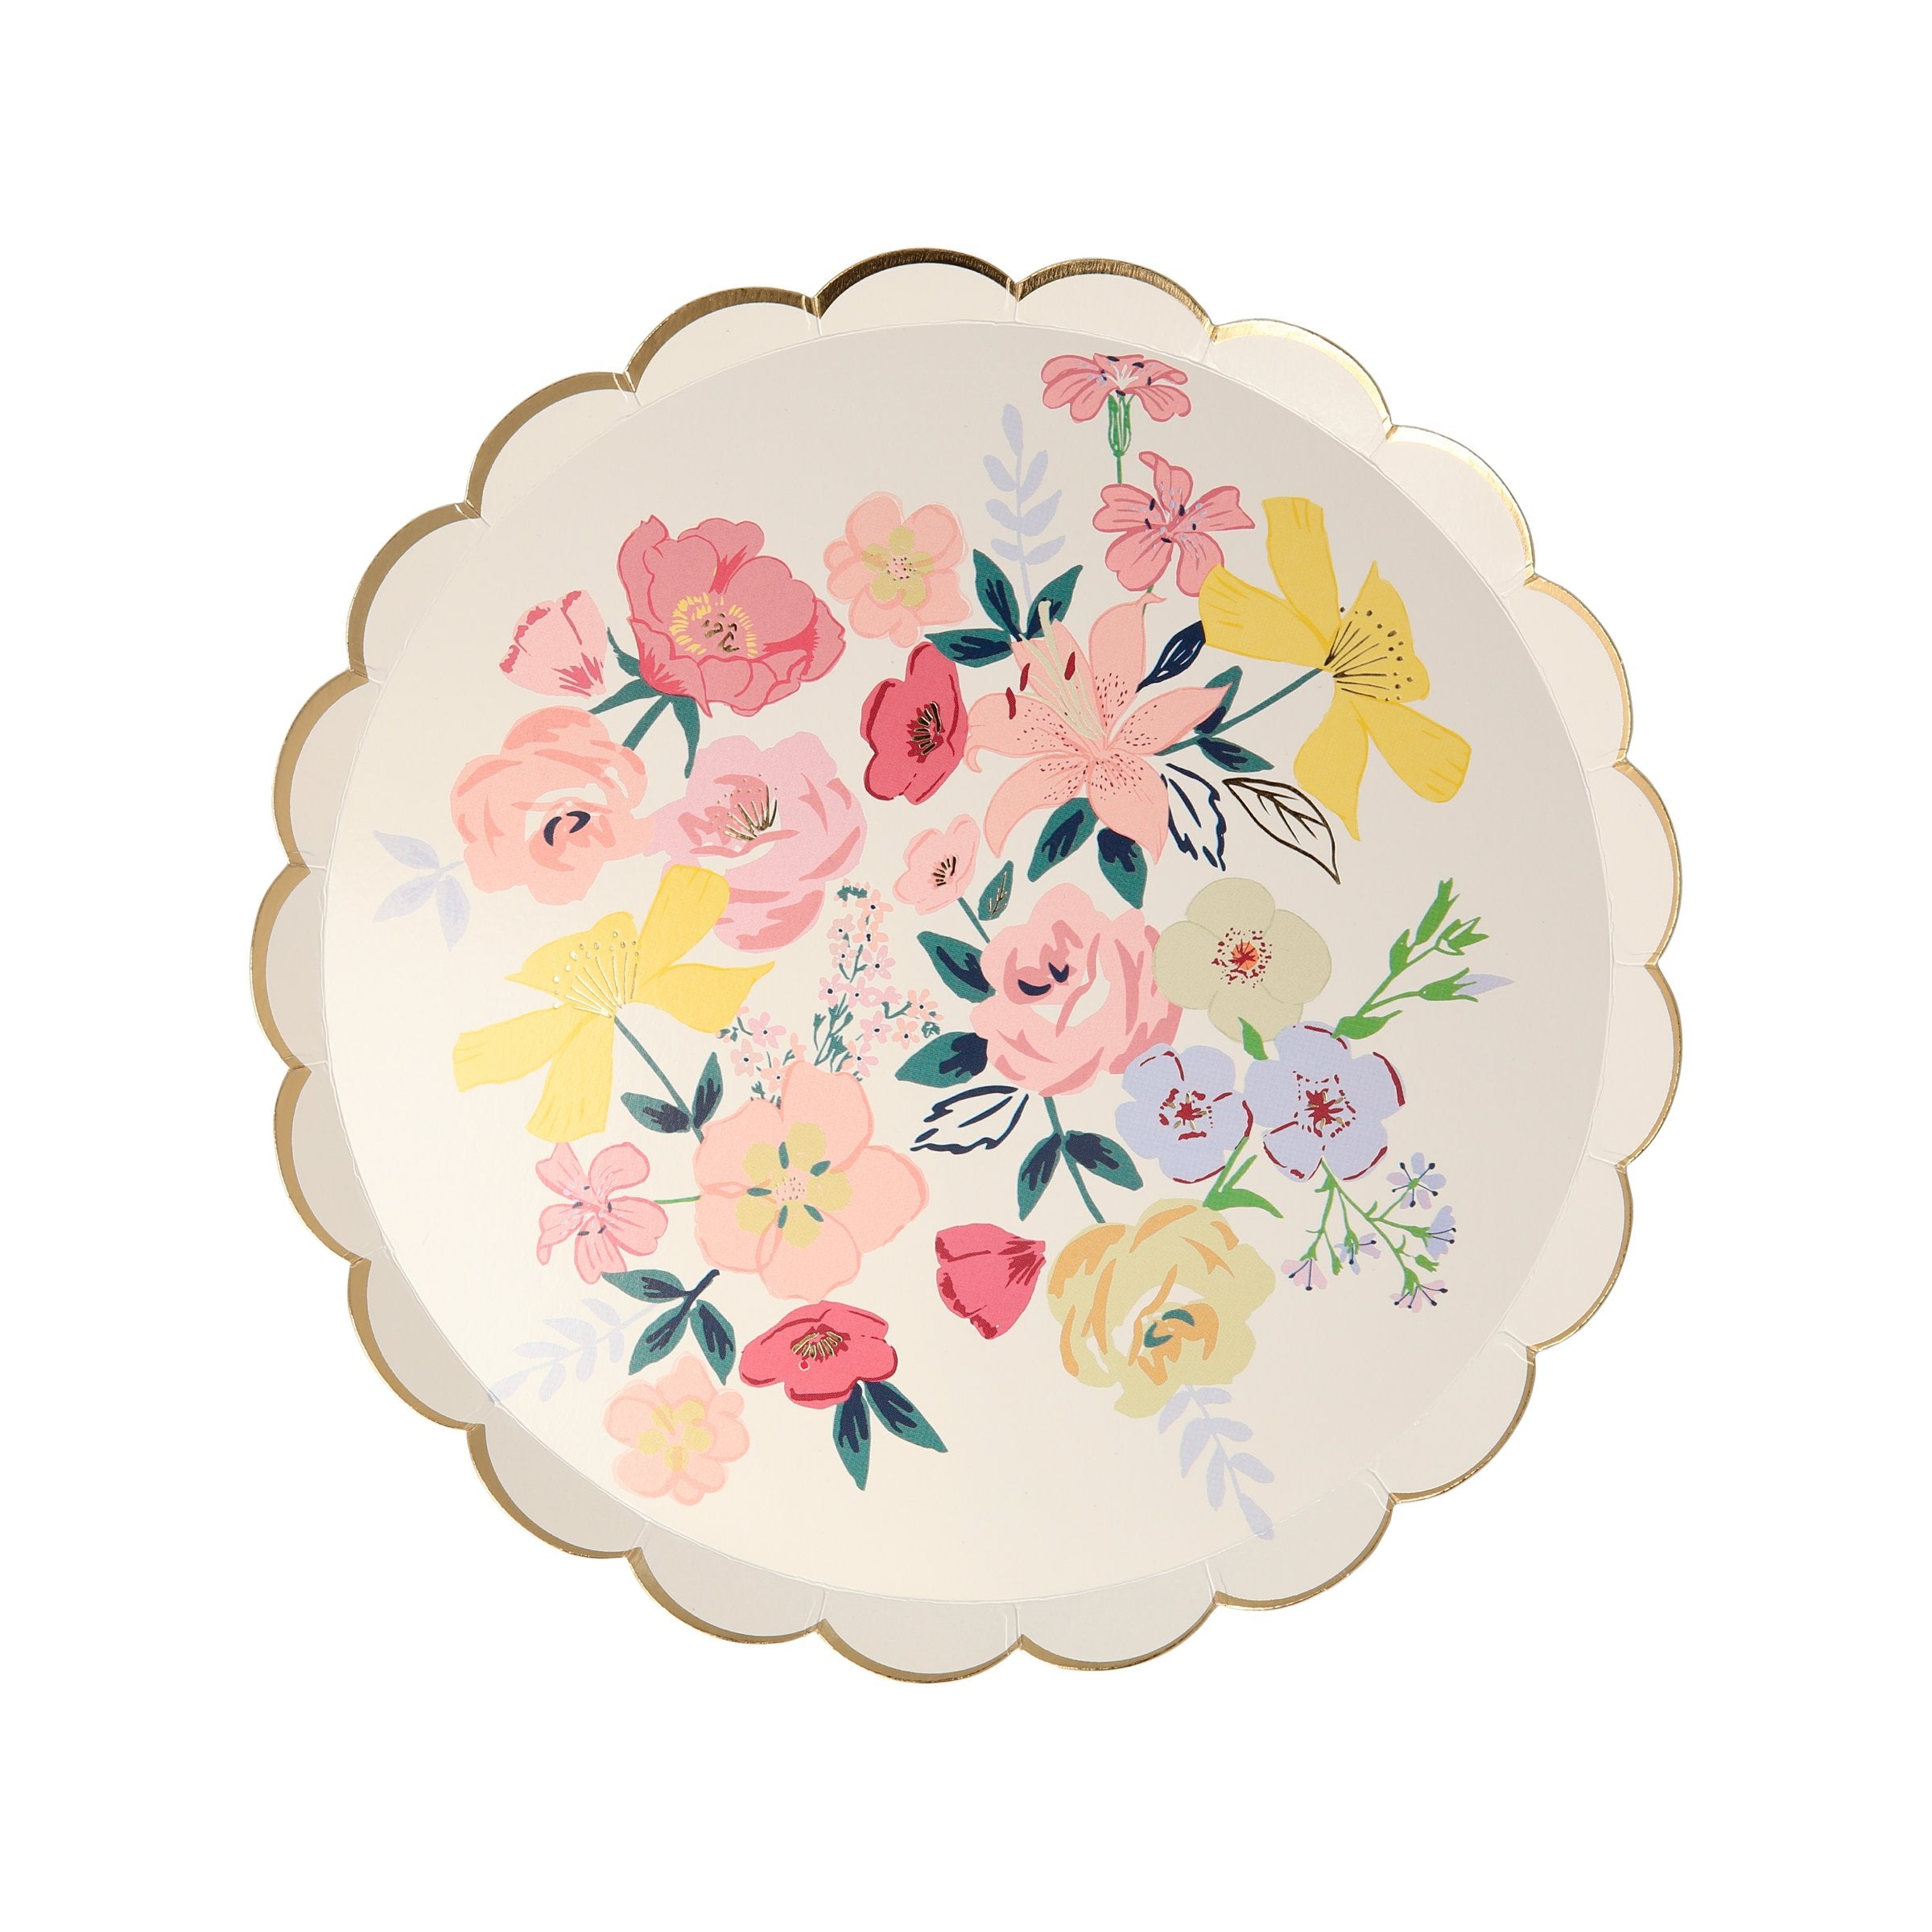 Our paper small plates with beautiful flowers are perfect for a garden party or picnic.